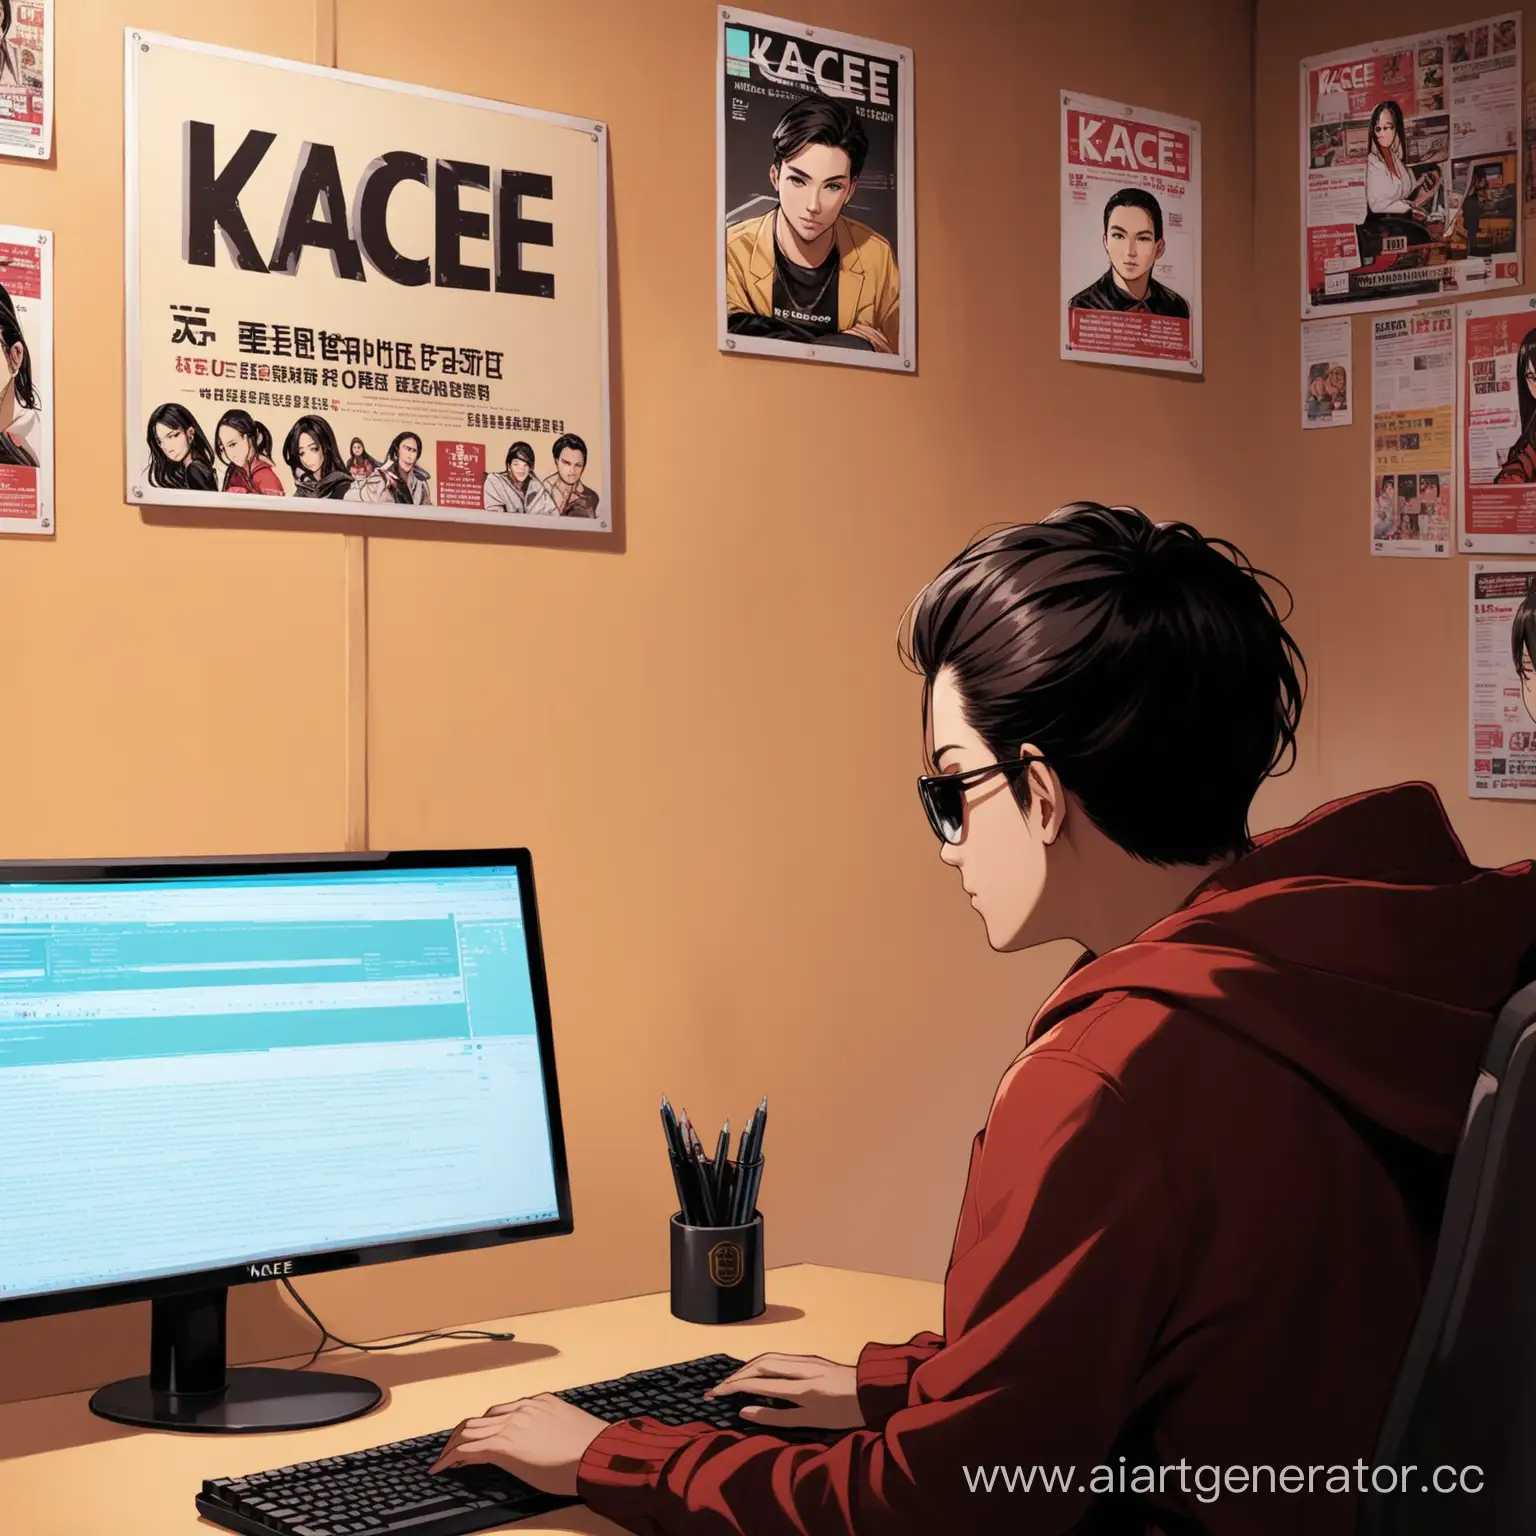 Focused-Person-at-Computer-with-Kacee-Inscription-on-Screen-and-Posters-in-Background